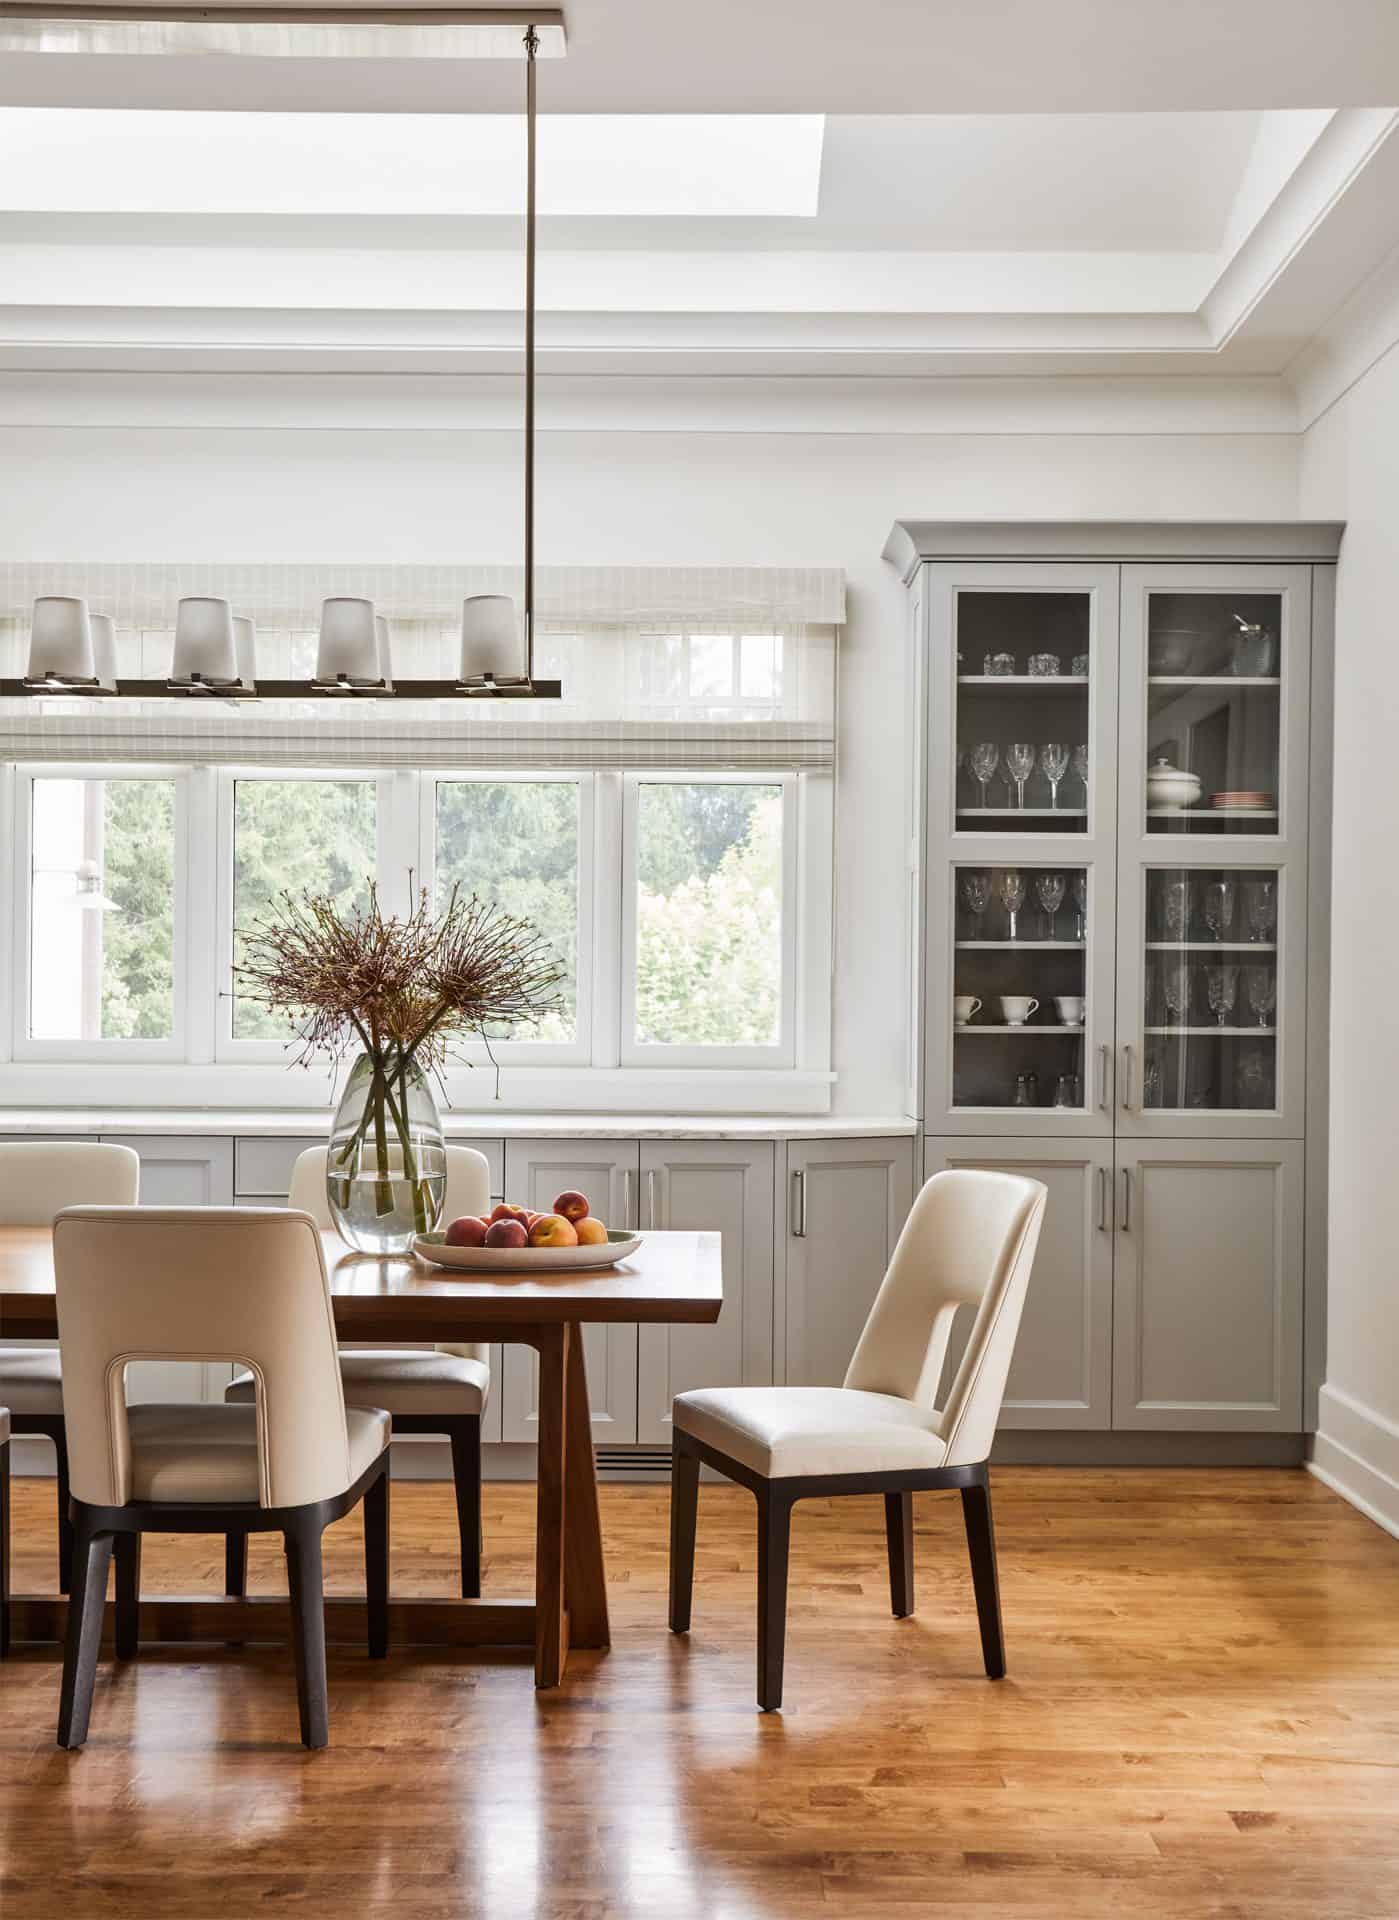 Dining room with built in gray base cabinets and glass front custom hutch